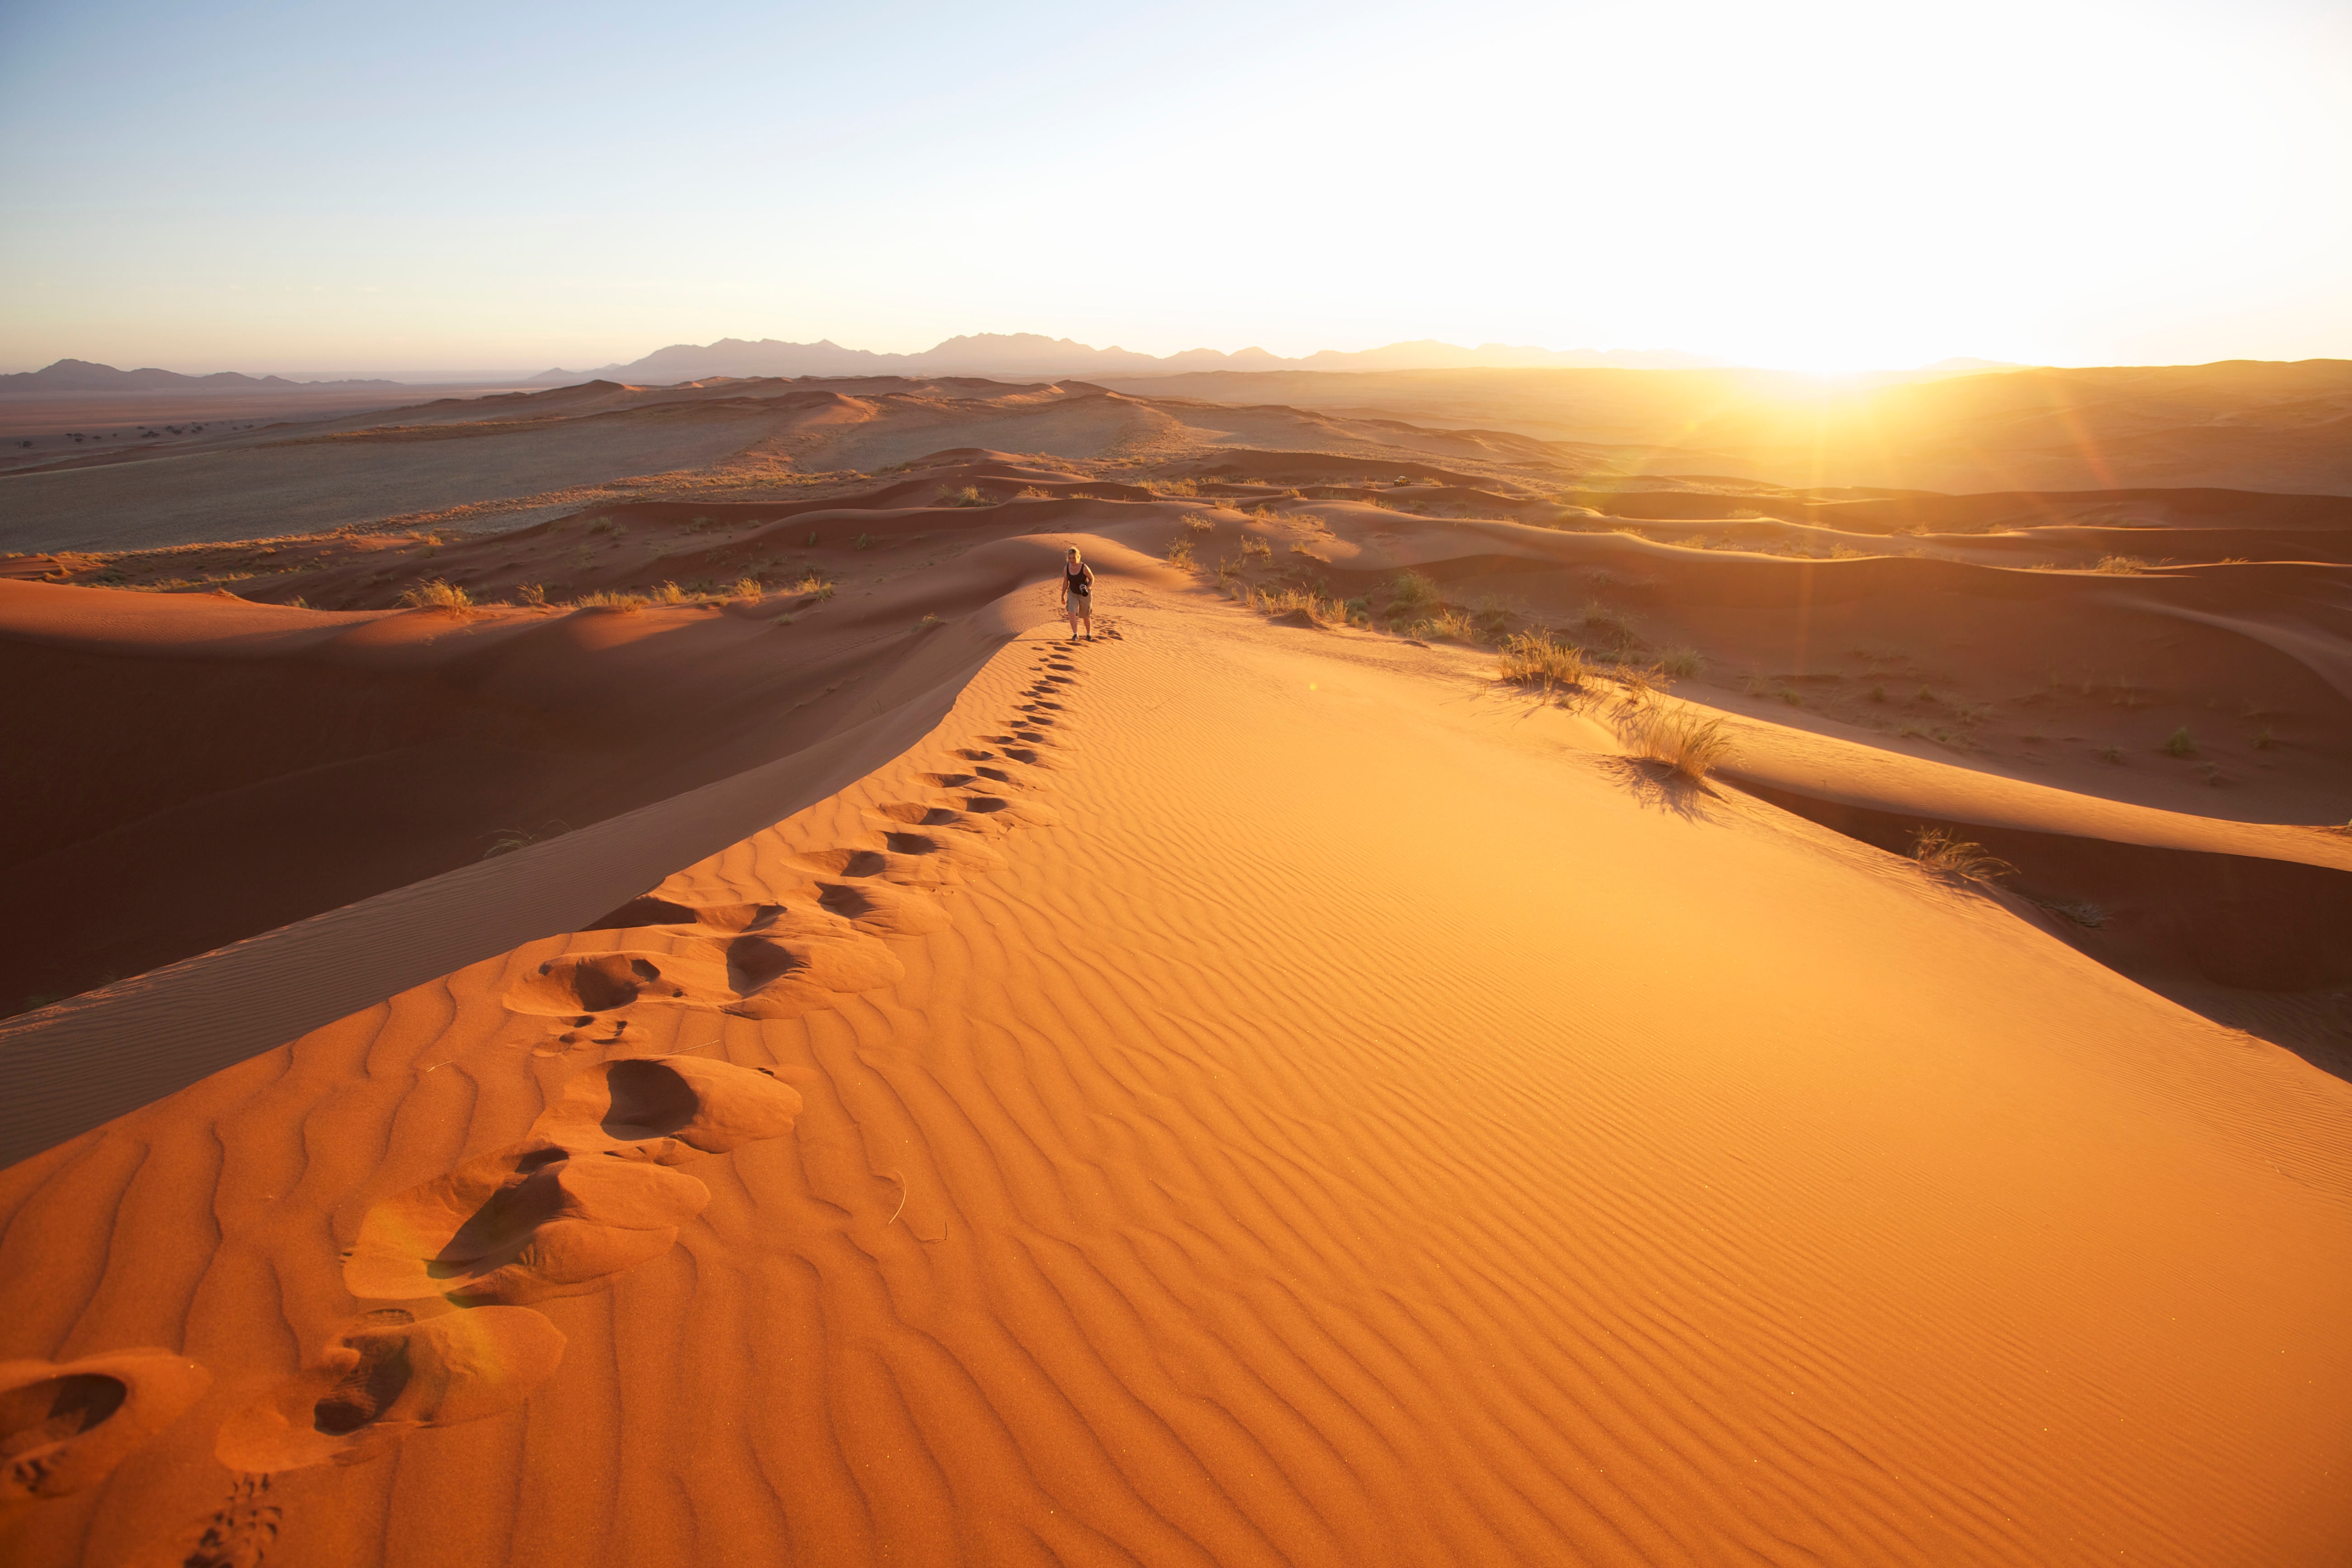 A person walking up a sand dune, Keetmashoop, Namibia Namibia, officially the Republic of Namibia, is a country in Southern Africa whose western border is the Atlantic Ocean. It shares borders with Angola and Zambia to the north, Botswana and Zimbabwe to 